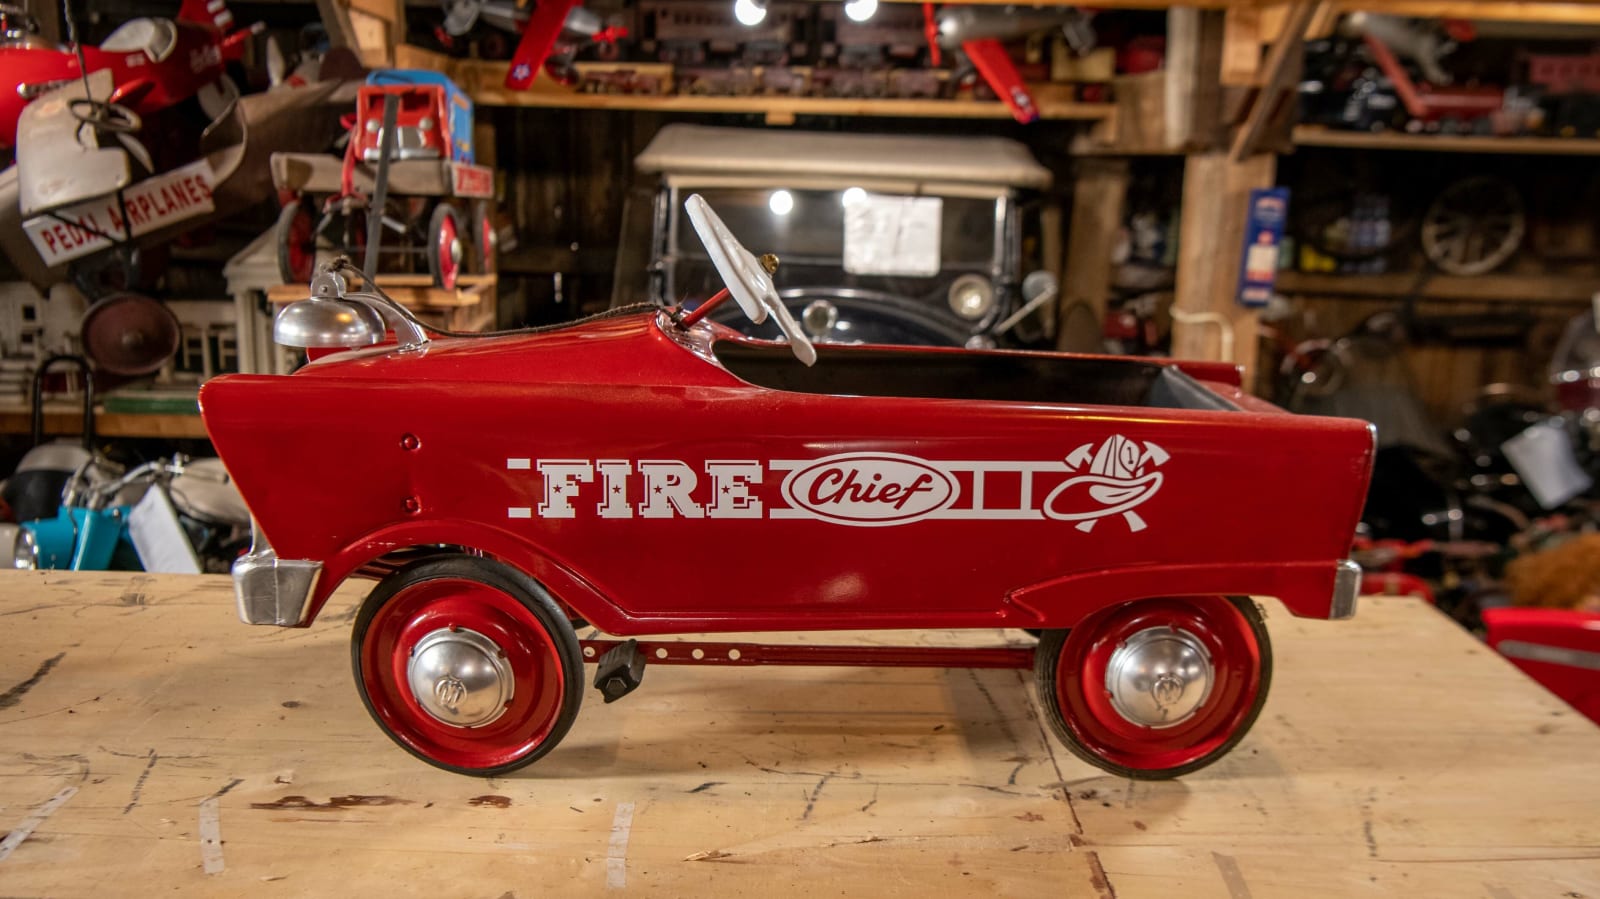 Murray Fire Chief Pedal Car At Elmers Auto And Toy Museum Collection 2022 As F295 Mecum Auctions